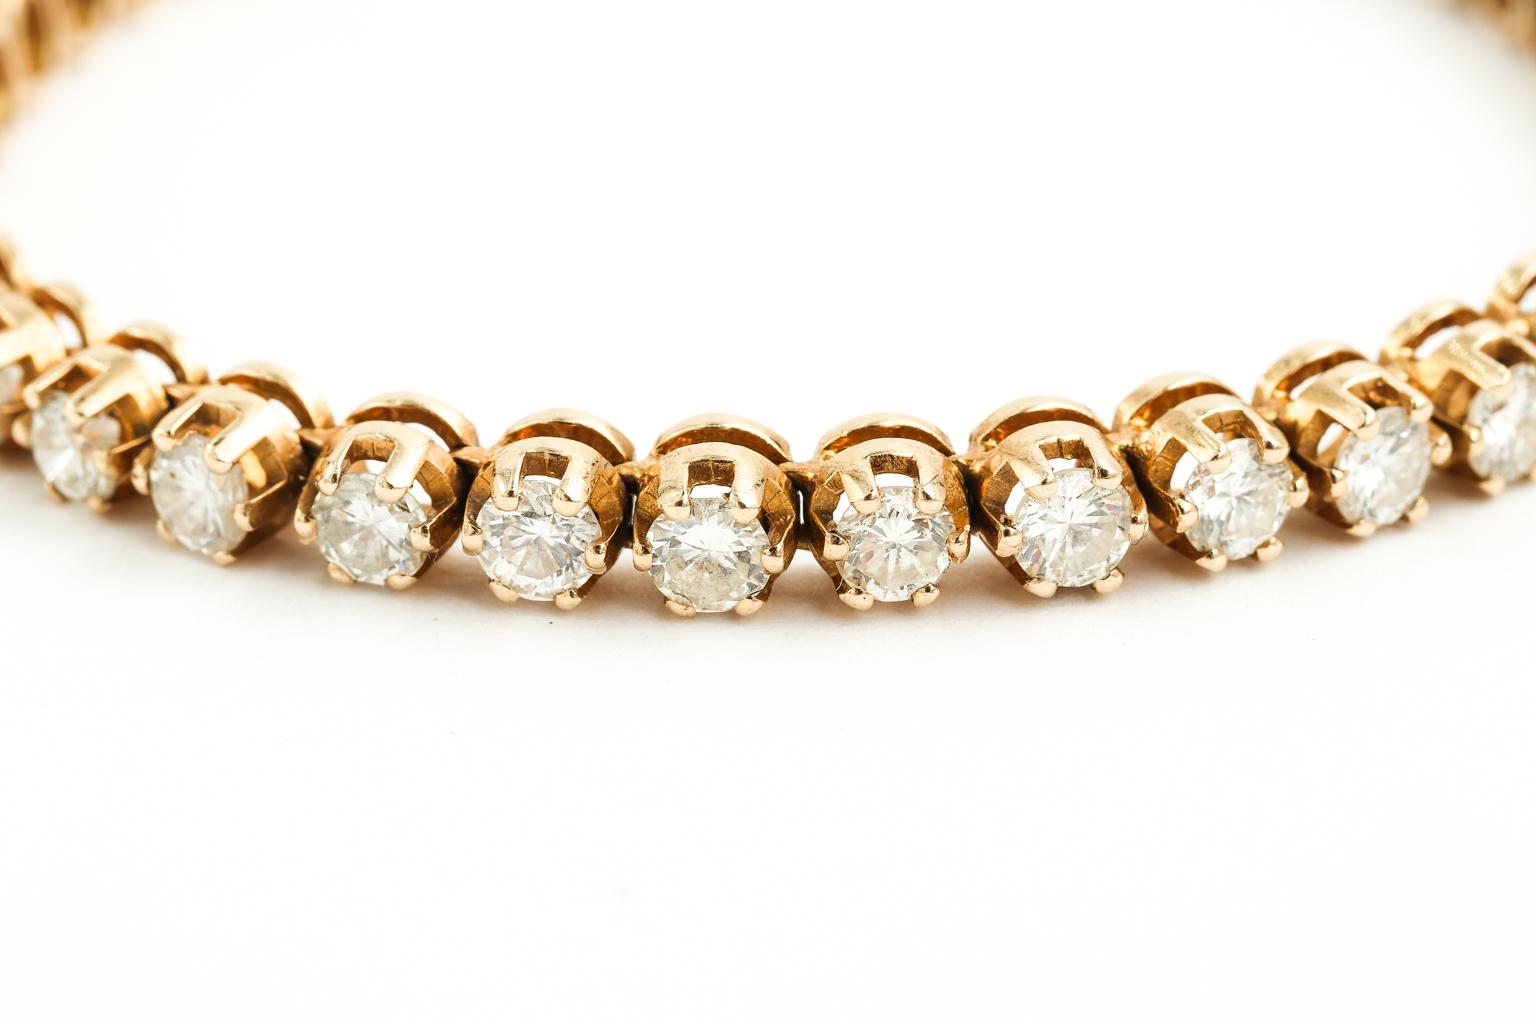 Circa mid-20th century handmade full cut diamond bracelet in 14 karat yellow gold with 7.20 total carats set into each section. Diamonds are excellent quality, near colorless in white US 1. There is a safety clasp in the closure. The bracelet